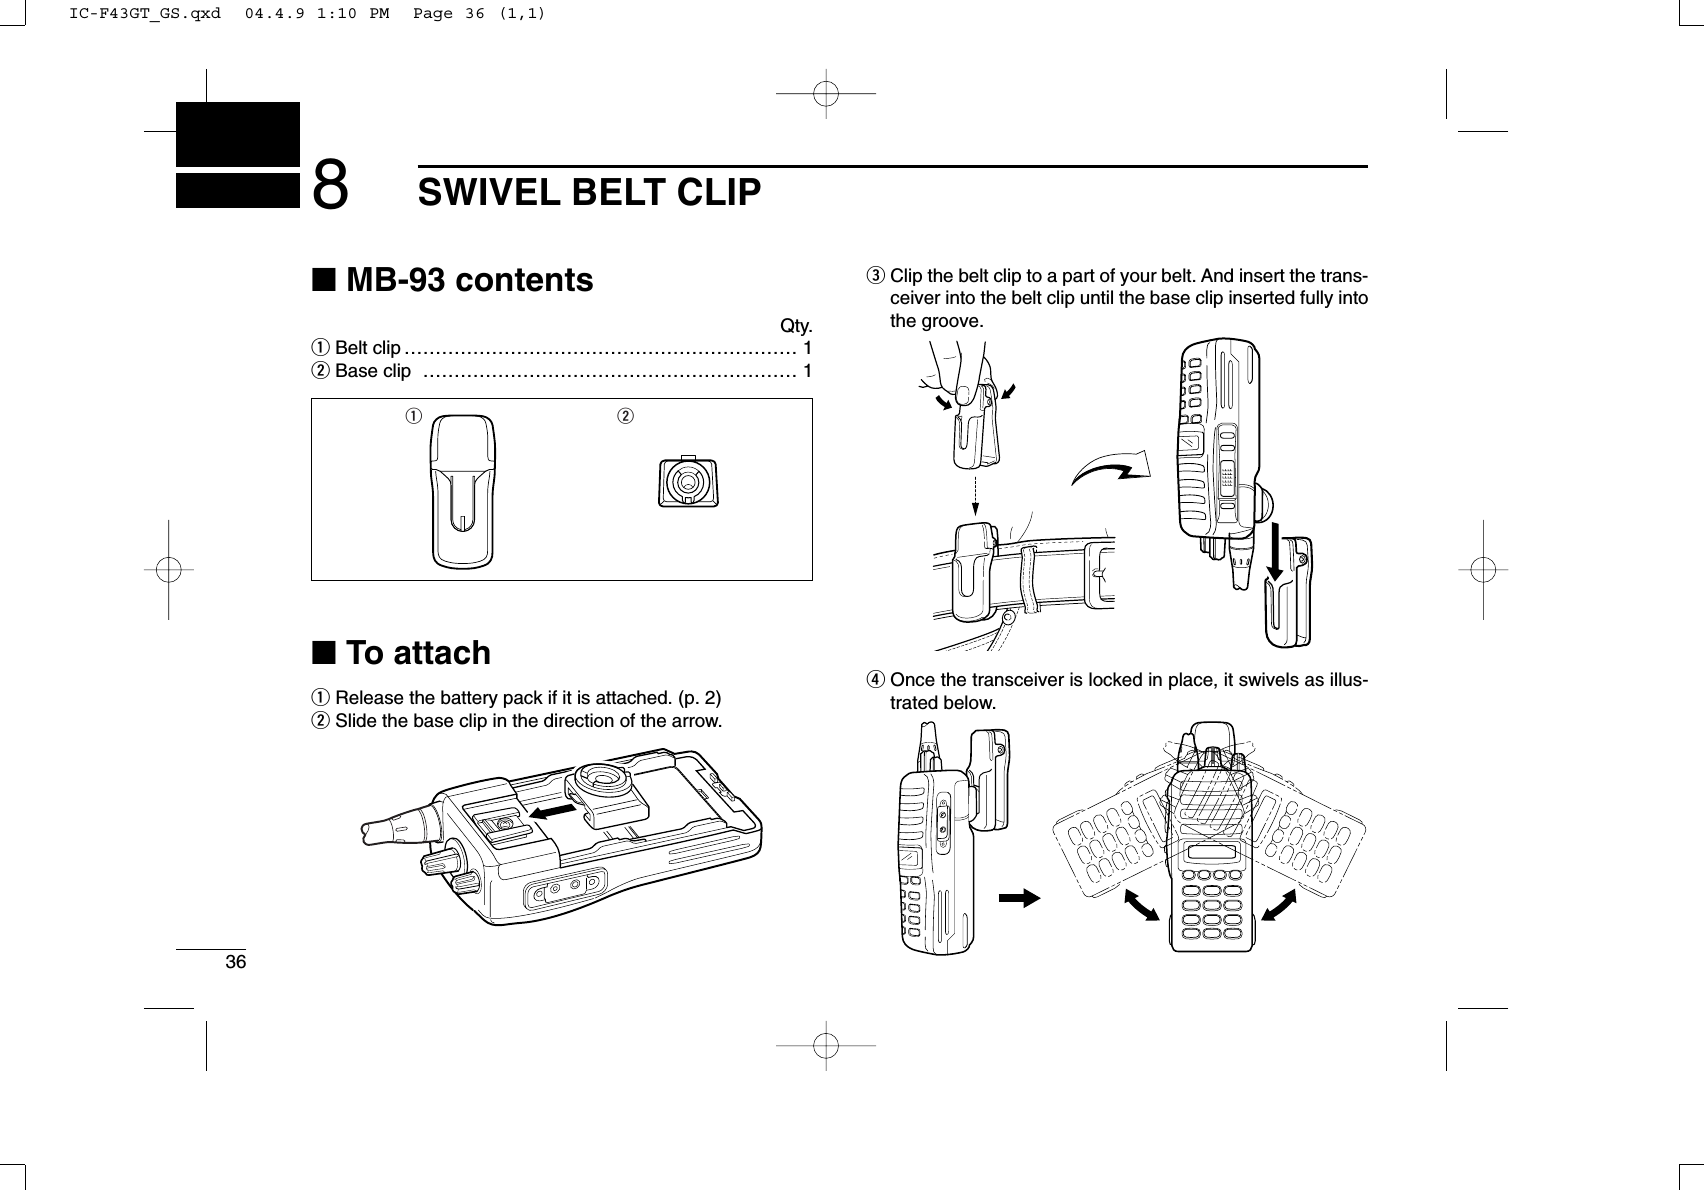 368SWIVEL BELT CLIP■MB-93 contentsQty.qBelt clip ……………………………………………………… 1wBase clip …………………………………………………… 1■To attachqRelease the battery pack if it is attached. (p. 2)wSlide the base clip in the direction of the arrow.eClip the belt clip to a part of your belt. And insert the trans-ceiver into the belt clip until the base clip inserted fully intothe groove.rOnce the transceiver is locked in place, it swivels as illus-trated below.q wIC-F43GT_GS.qxd  04.4.9 1:10 PM  Page 36 (1,1)